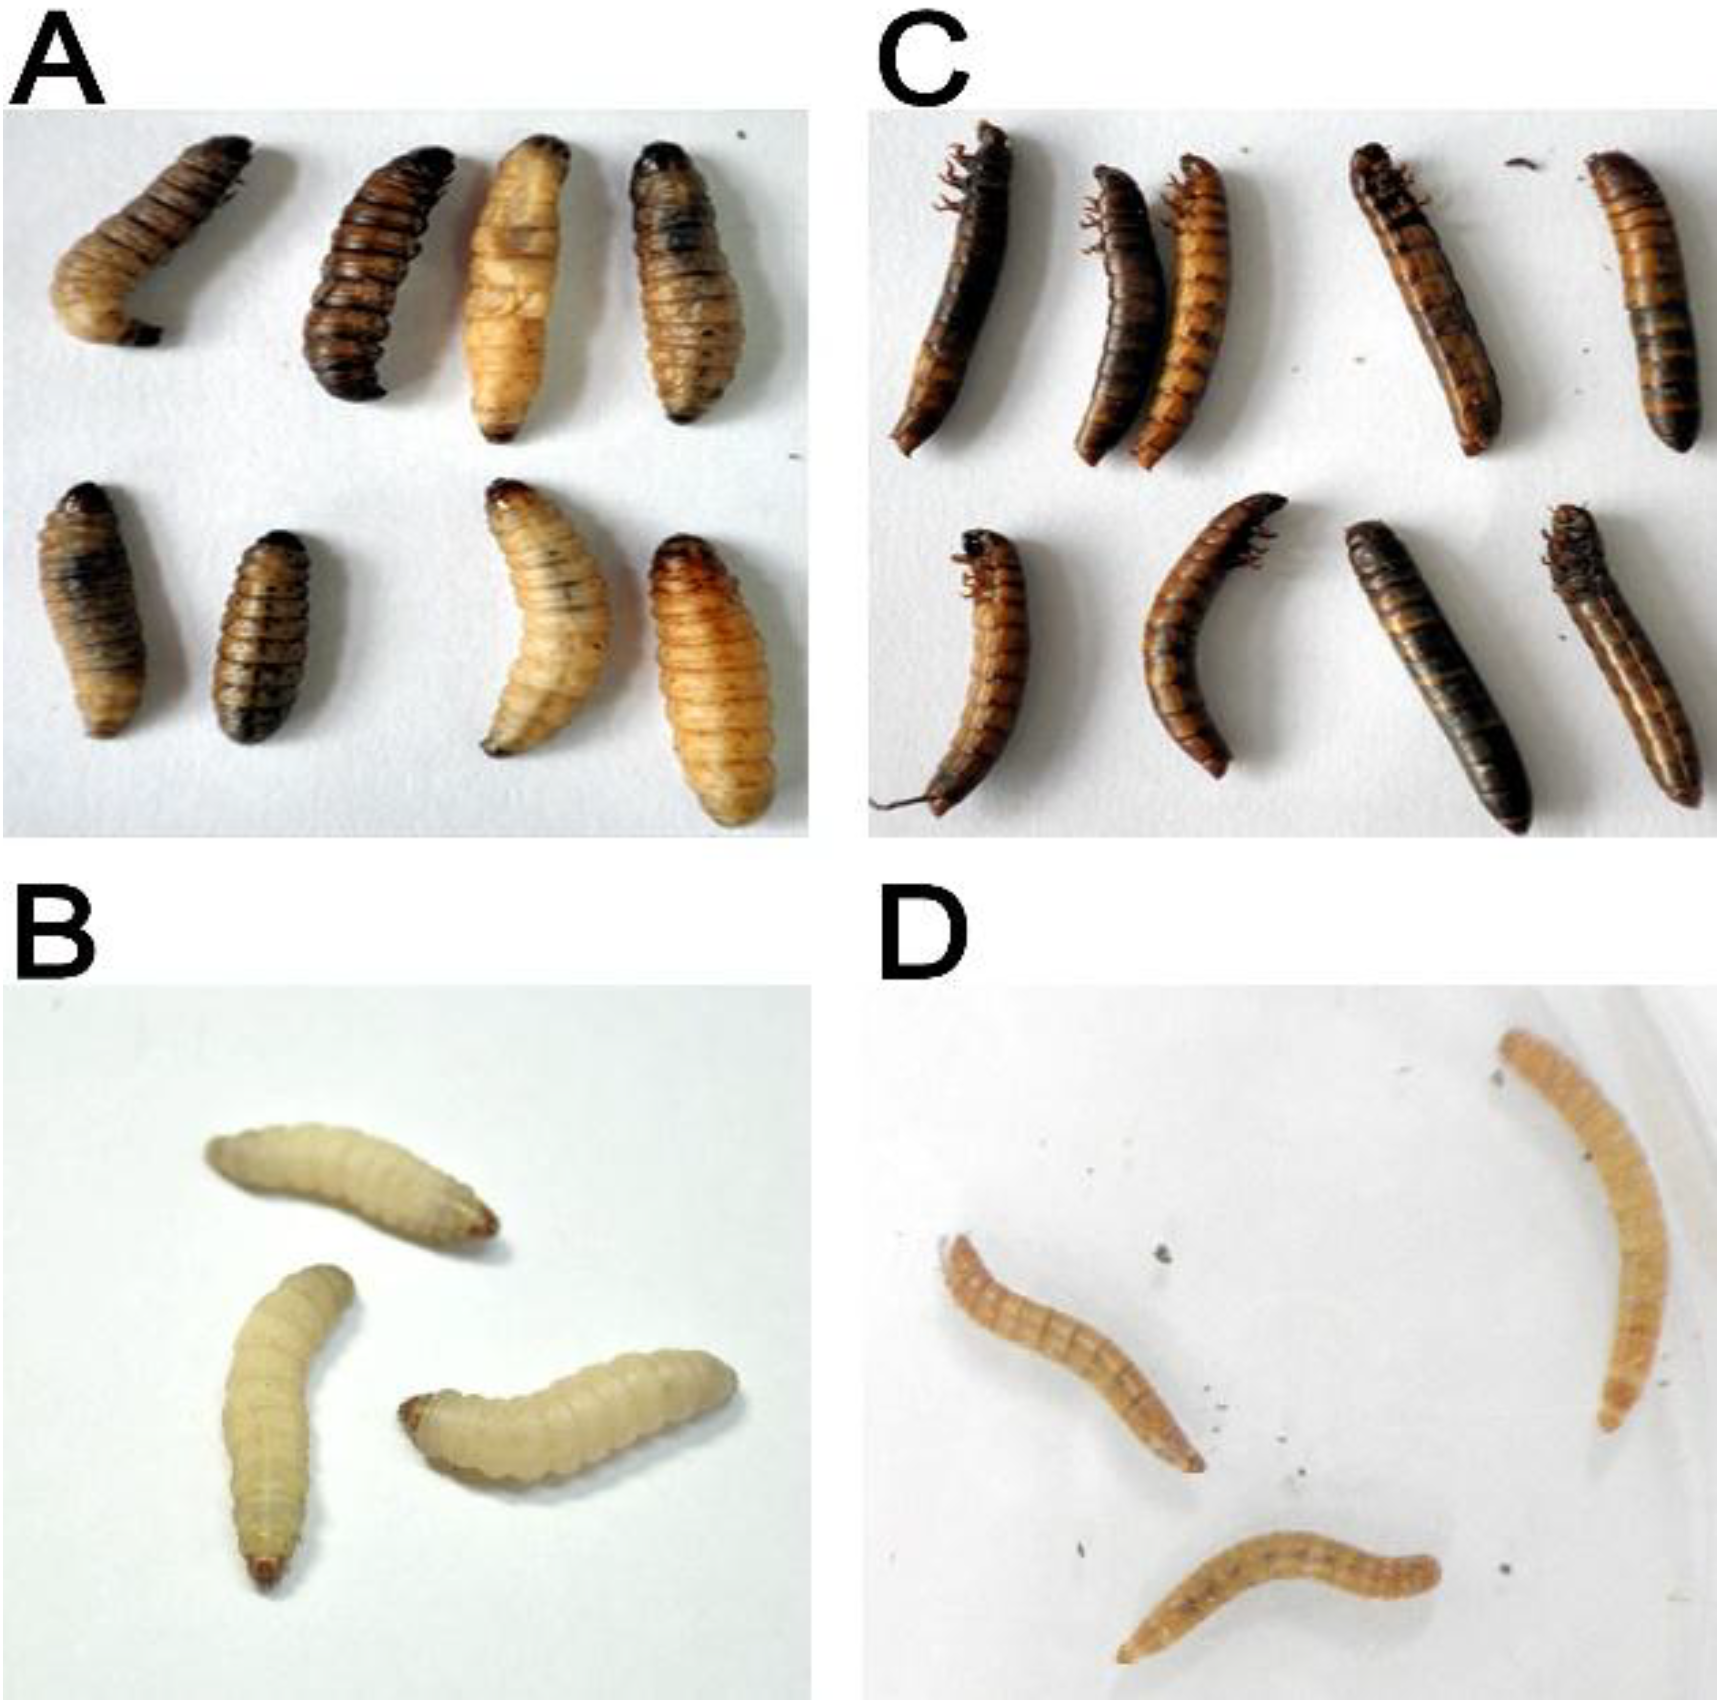 Toxins | Free Full-Text | Identification and Characterization of the  Insecticidal Toxin “Makes Caterpillars Floppy” in Photorhabdus temperata  M1021 Using a Cosmid Library